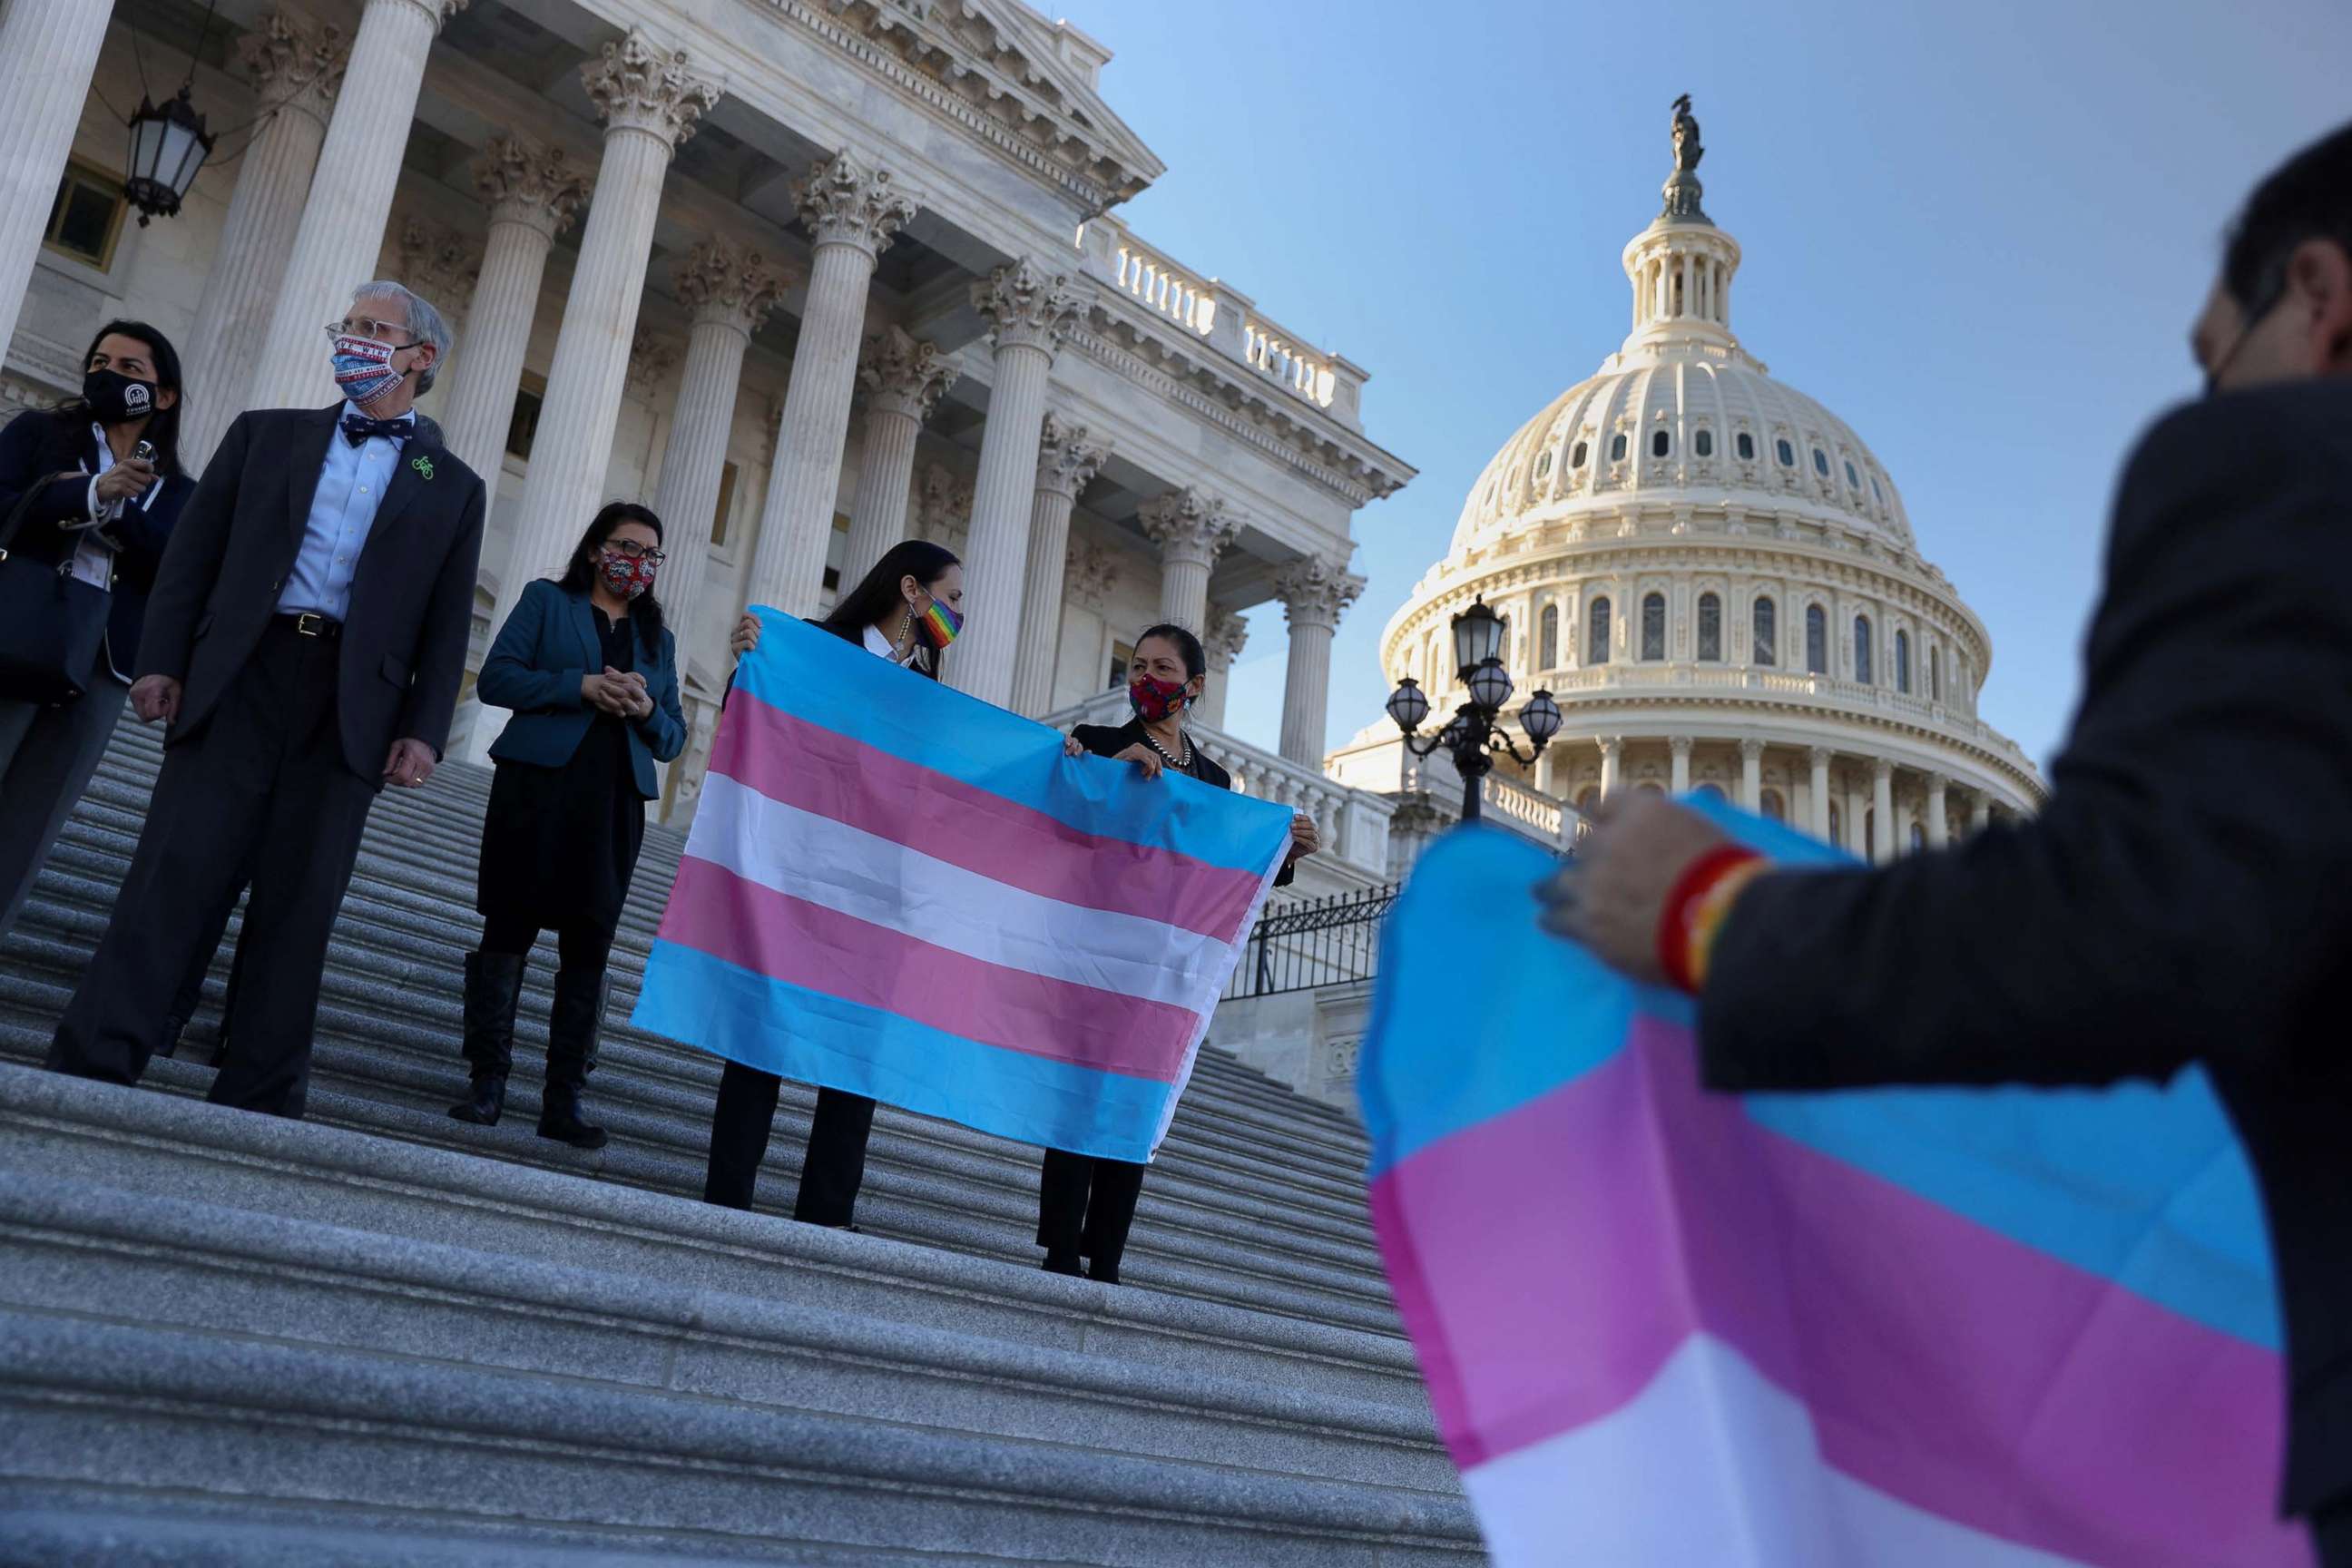 PHOTO: Rep. Deb Haaland holds a Transgender Pride flag beside democratic colleagues on Capitol Hill, Feb. 25, 2021. 